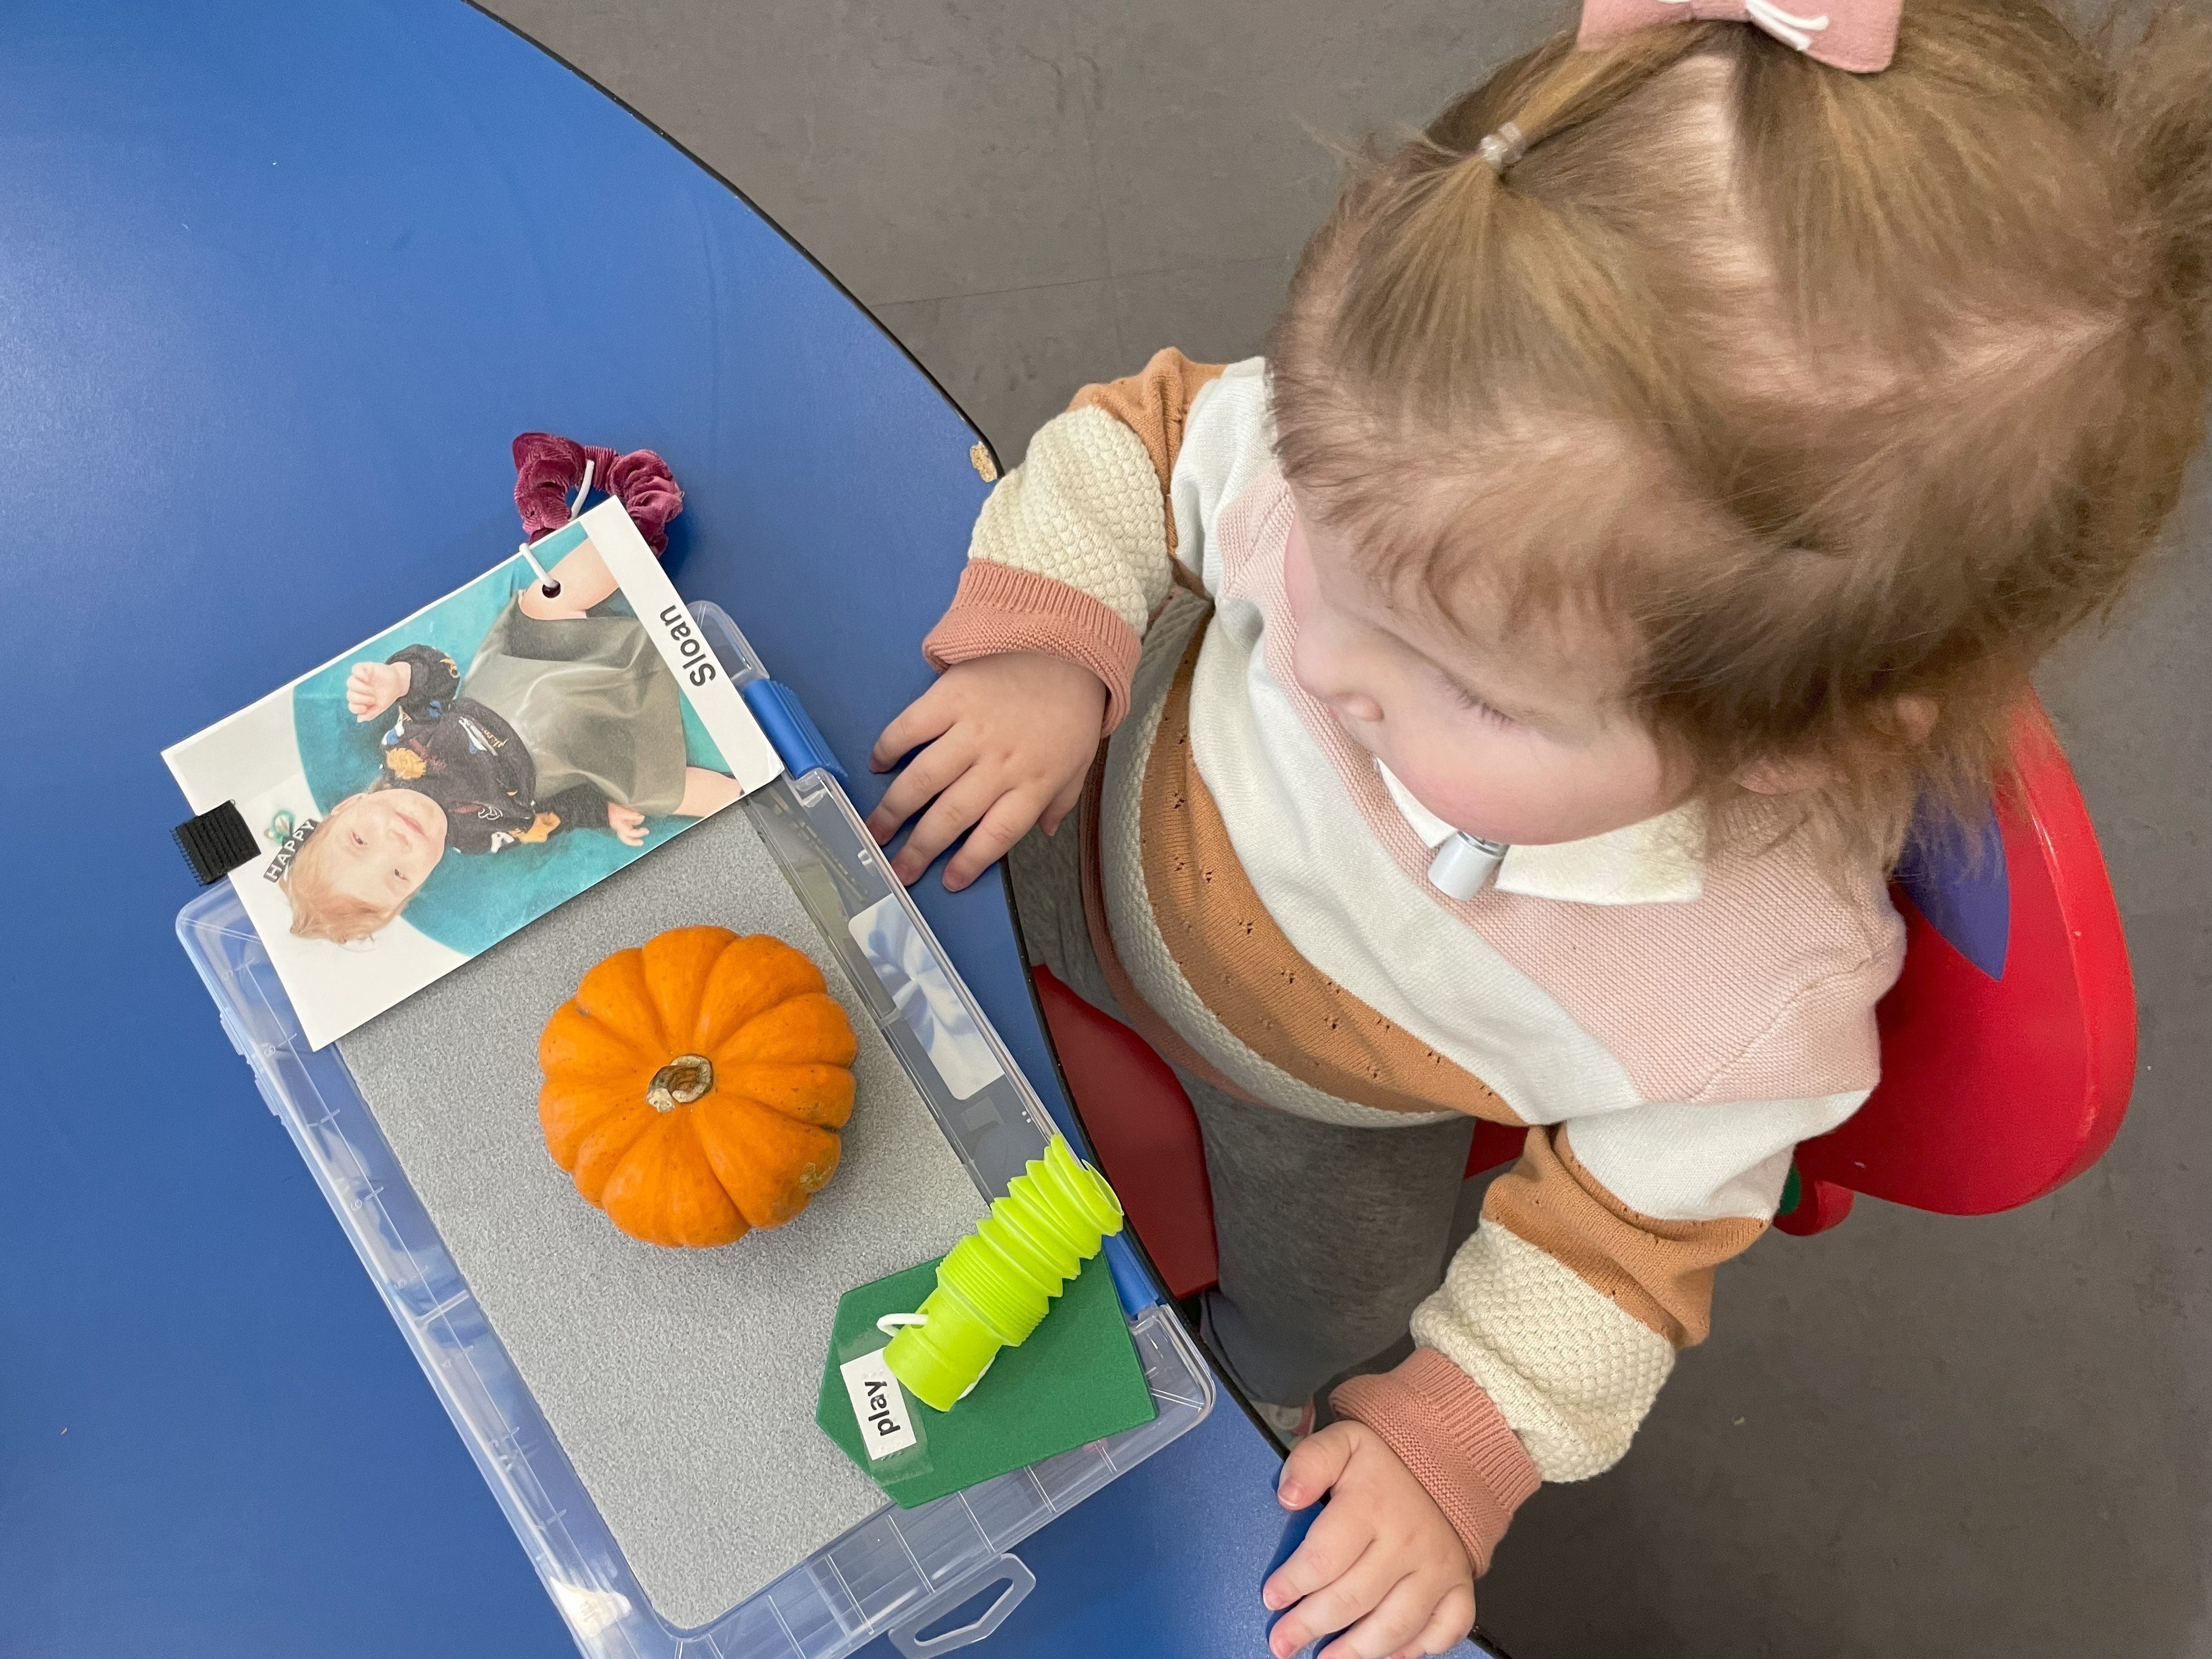 A toddler who is deafblind sits at a small desk. In front of her is a tray that holds two objects and a photo of the toddler. One of the objects is labeled “play” and the photo is labeled with the child’s name.